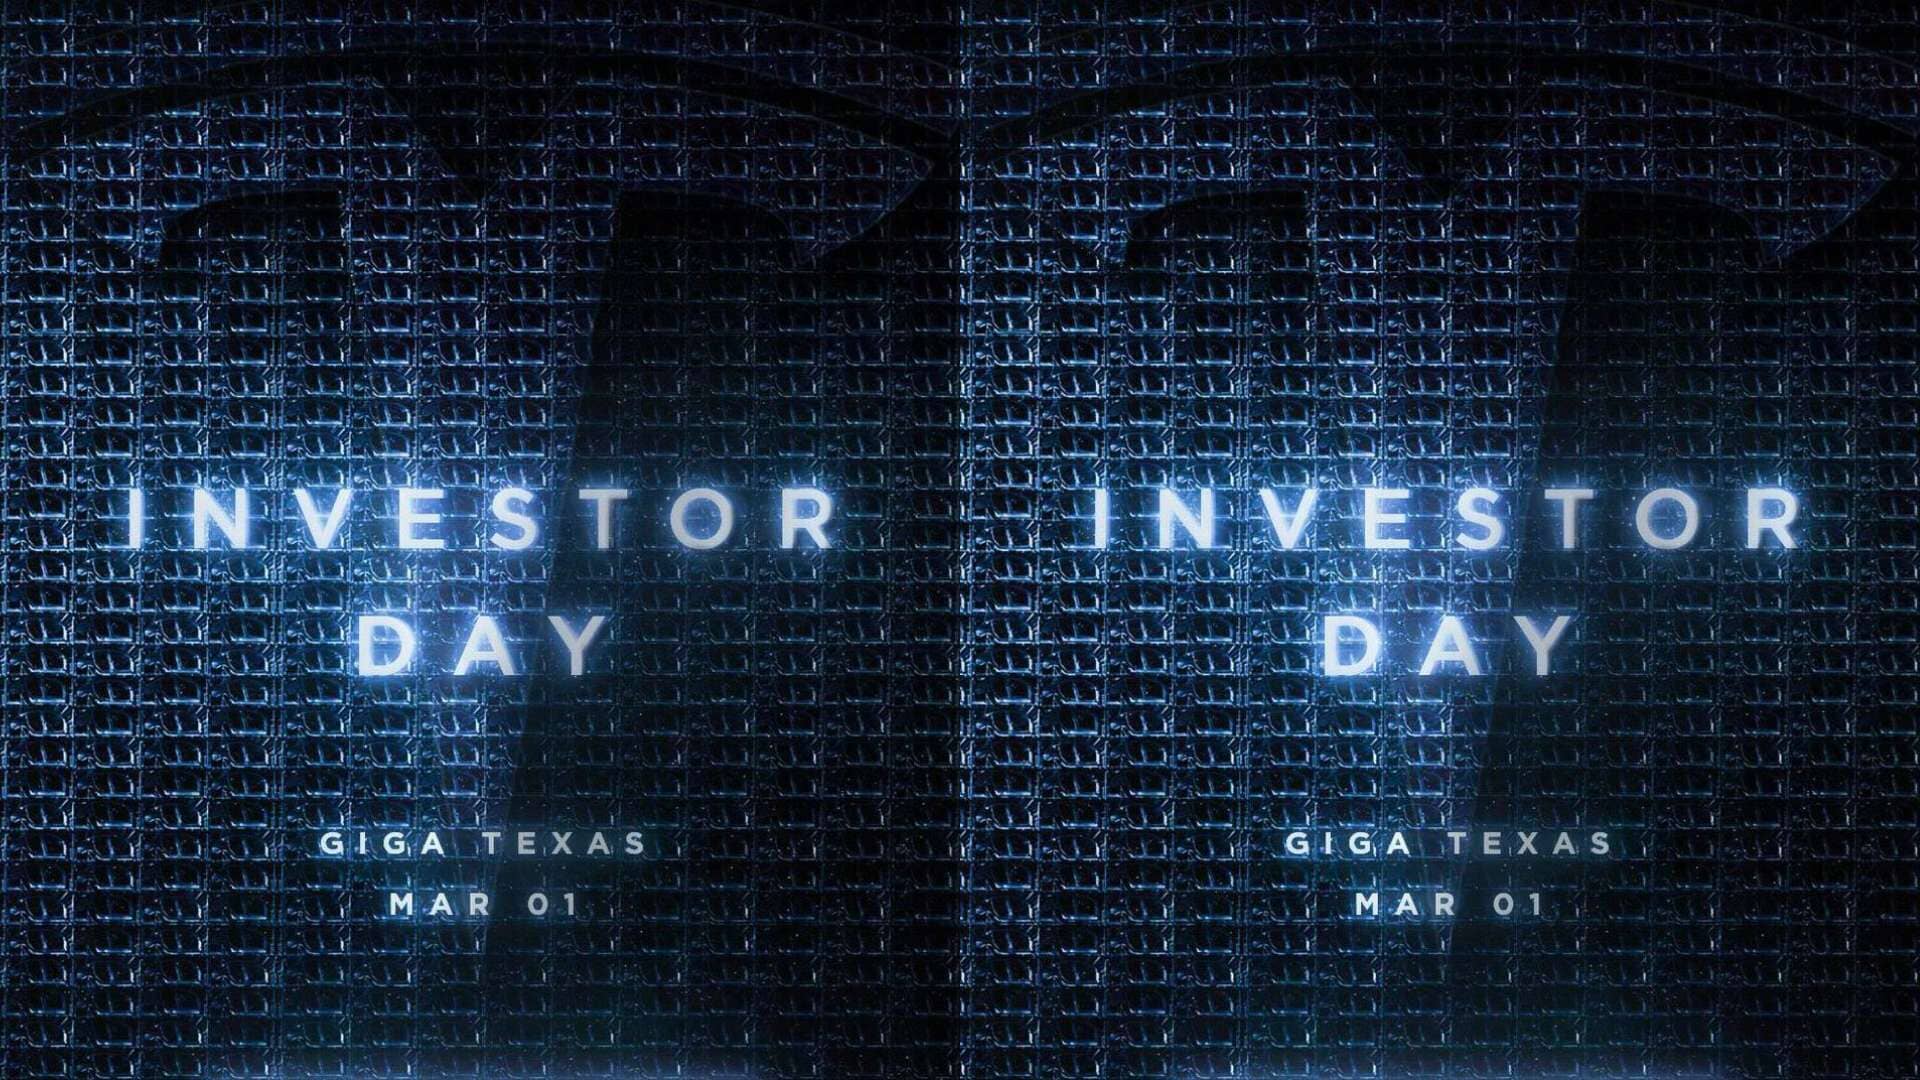 Tesla Investor Day 2023 is today: Find out how to tune in and what surprises to expect.